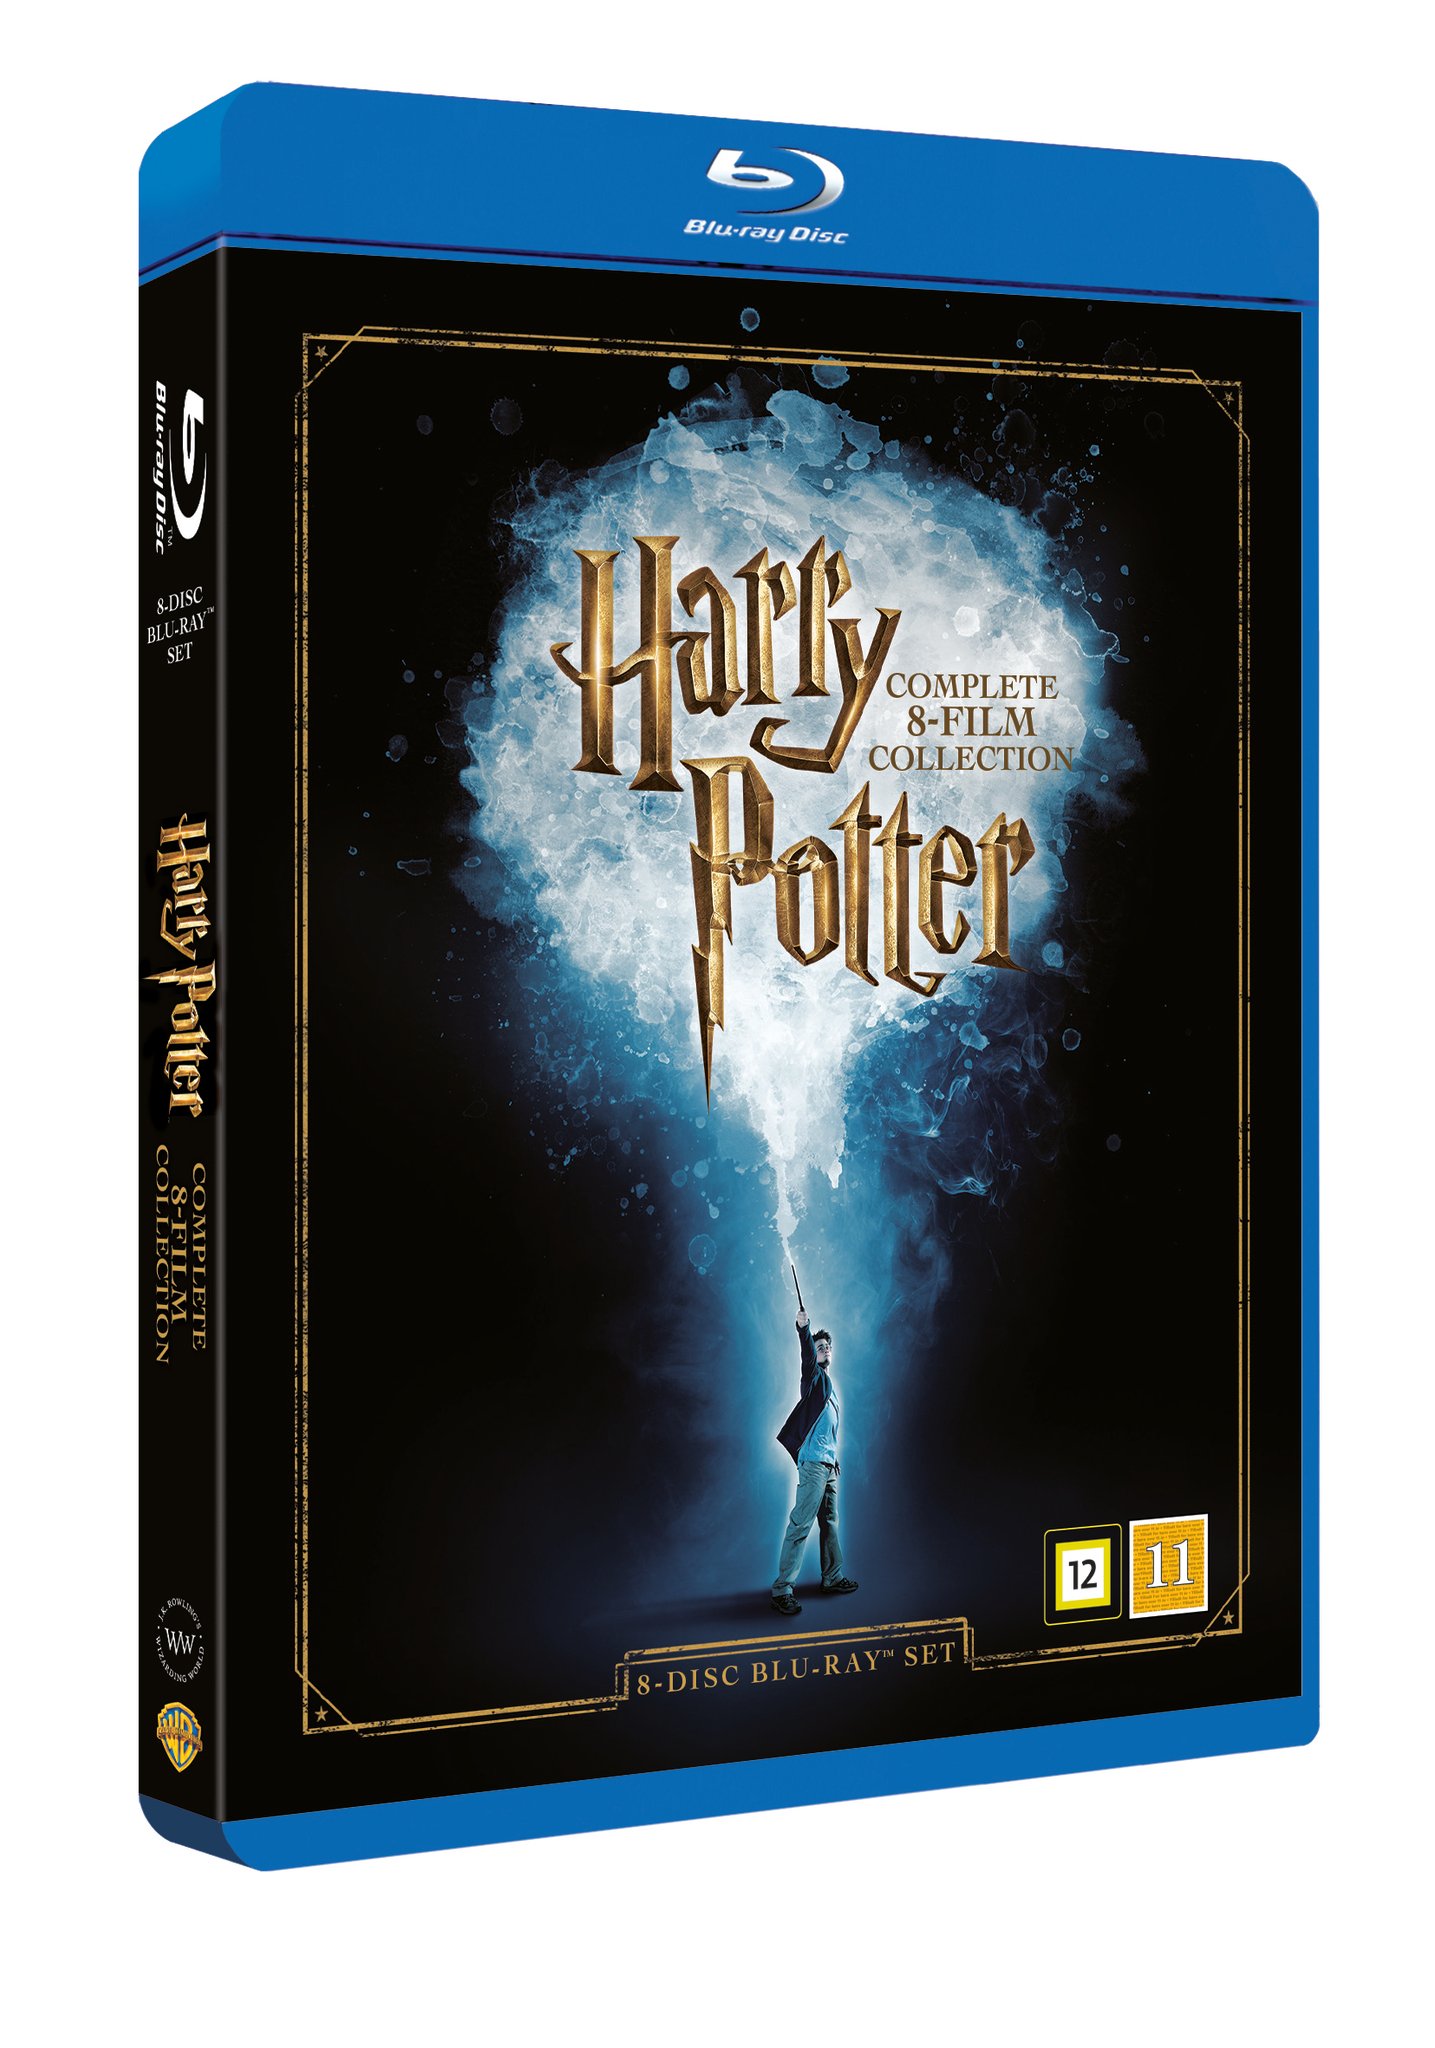 the complete harry potter film music collection